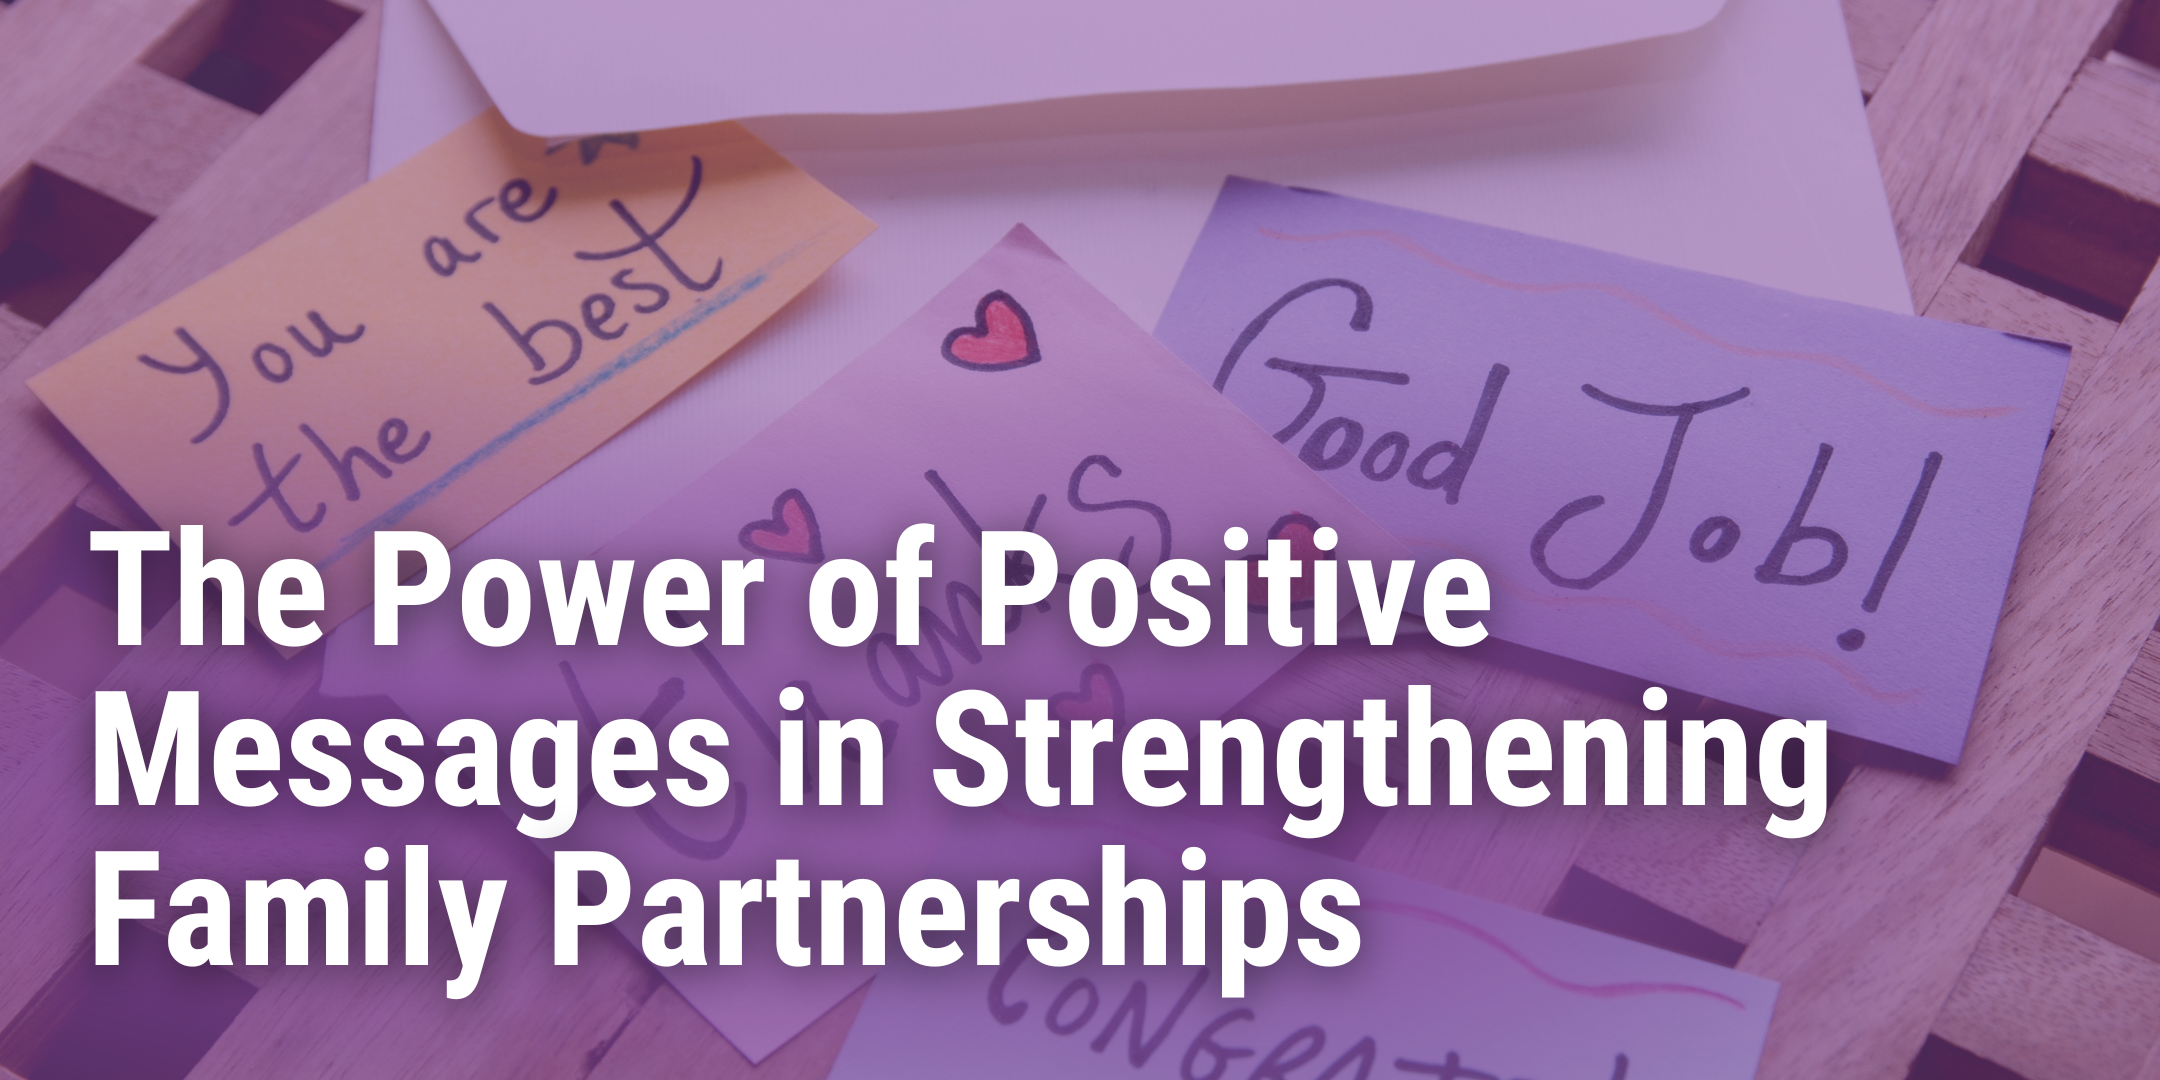 Purple banner photo of handwritten notes of words of encouragement like "Good Job!" and "You are the best". Banner displays blog title "The Power of Positive Messages in Strengthening Family Partnerships".